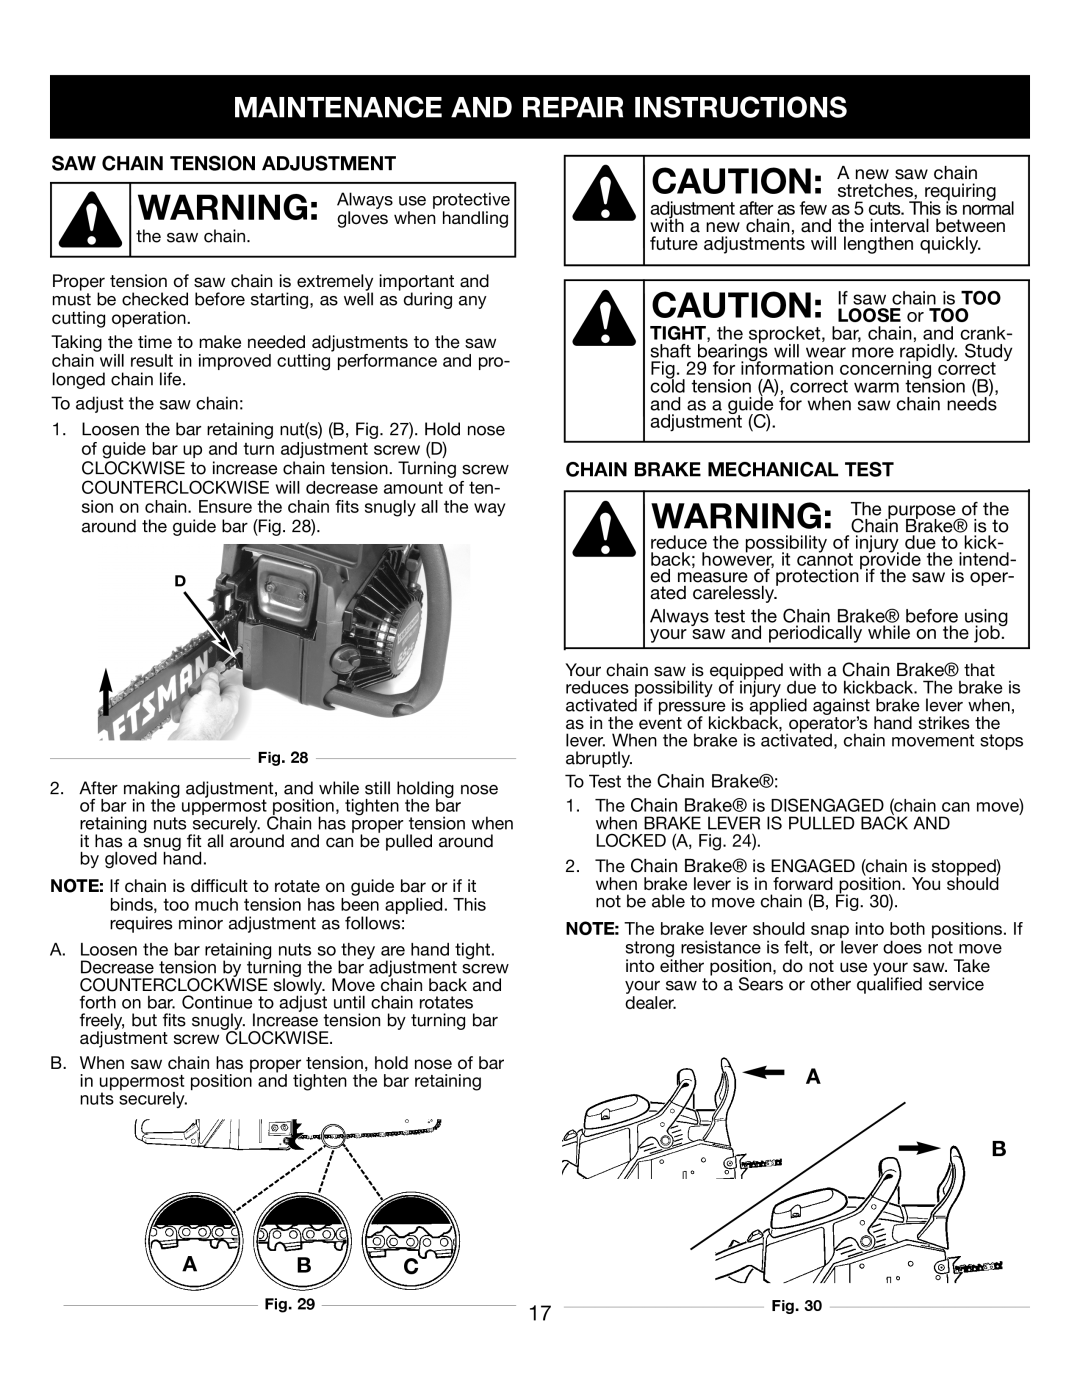 Craftsman 316350840 Maintenance And Repair Instructions, A B C, Saw Chain Tension Adjustment, Chain Brake Mechanical Test 